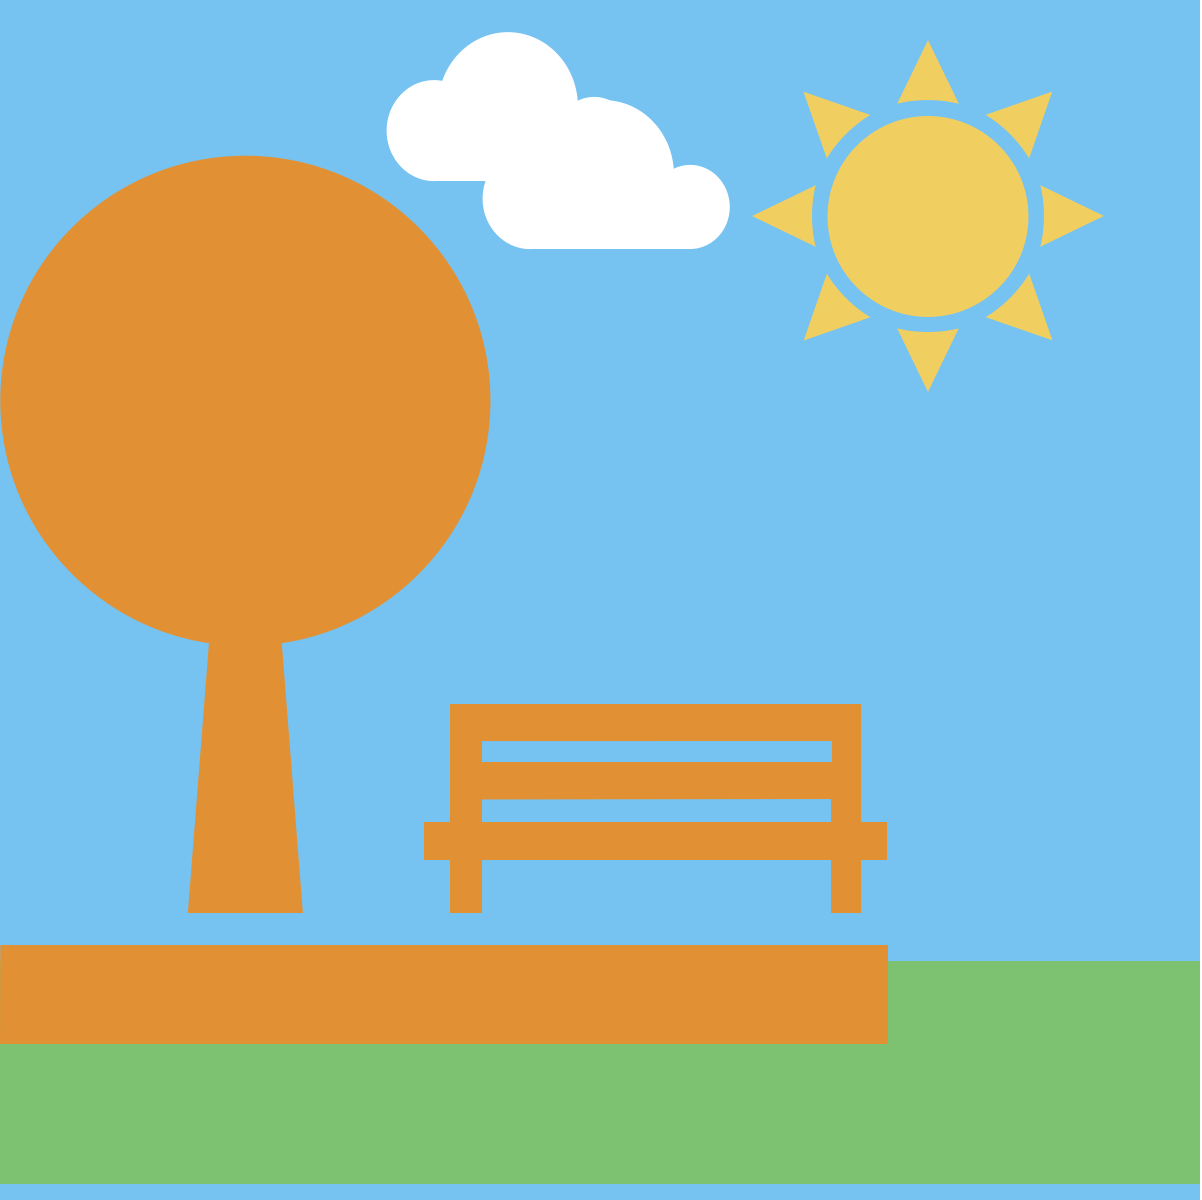 Clip art of a bench and a tree behind a sky and on top of grass. There is the sun and a couple of clouds in the sky.